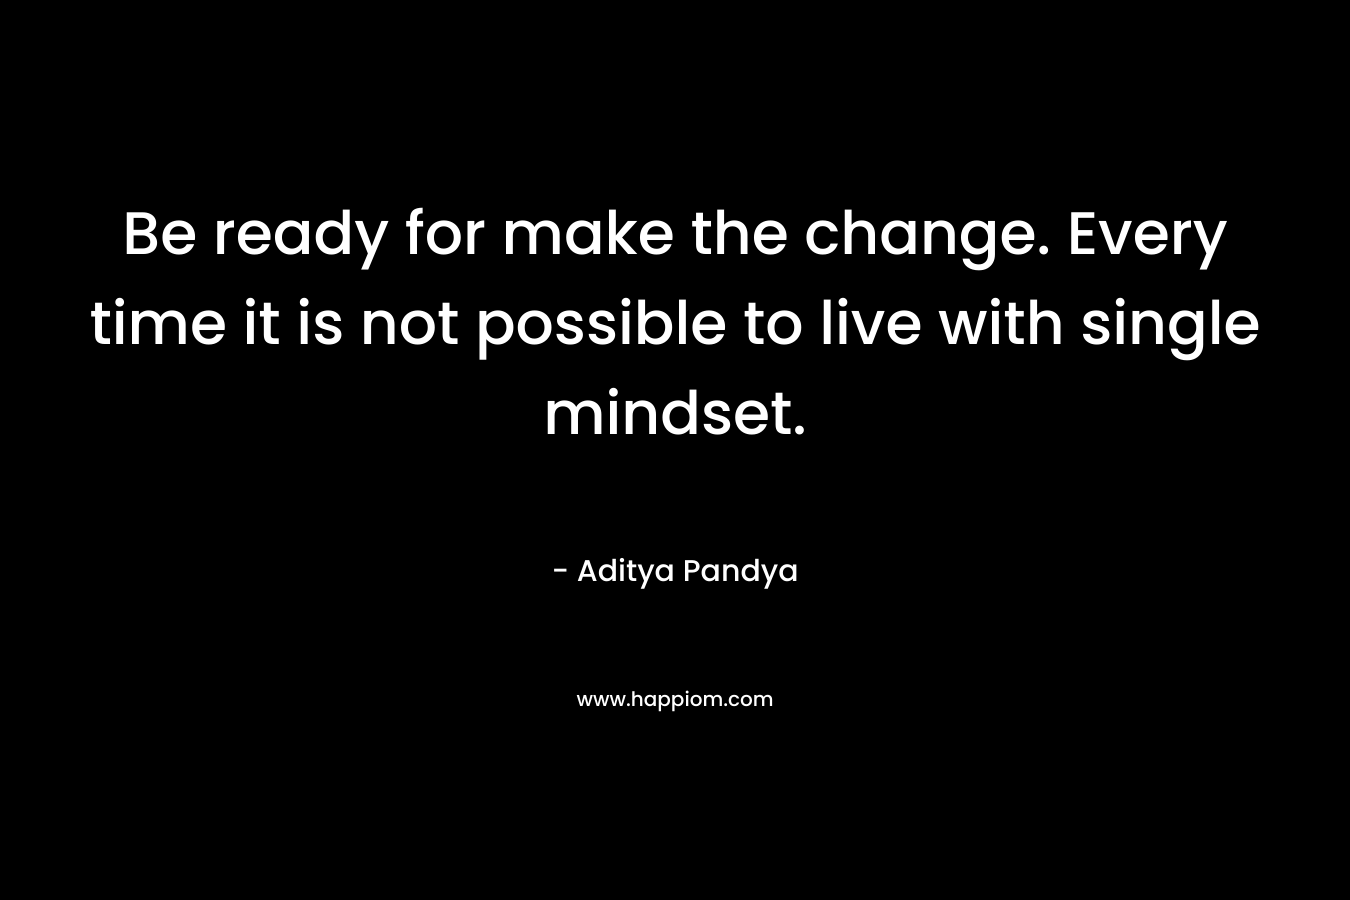 Be ready for make the change. Every time it is not possible to live with single mindset.